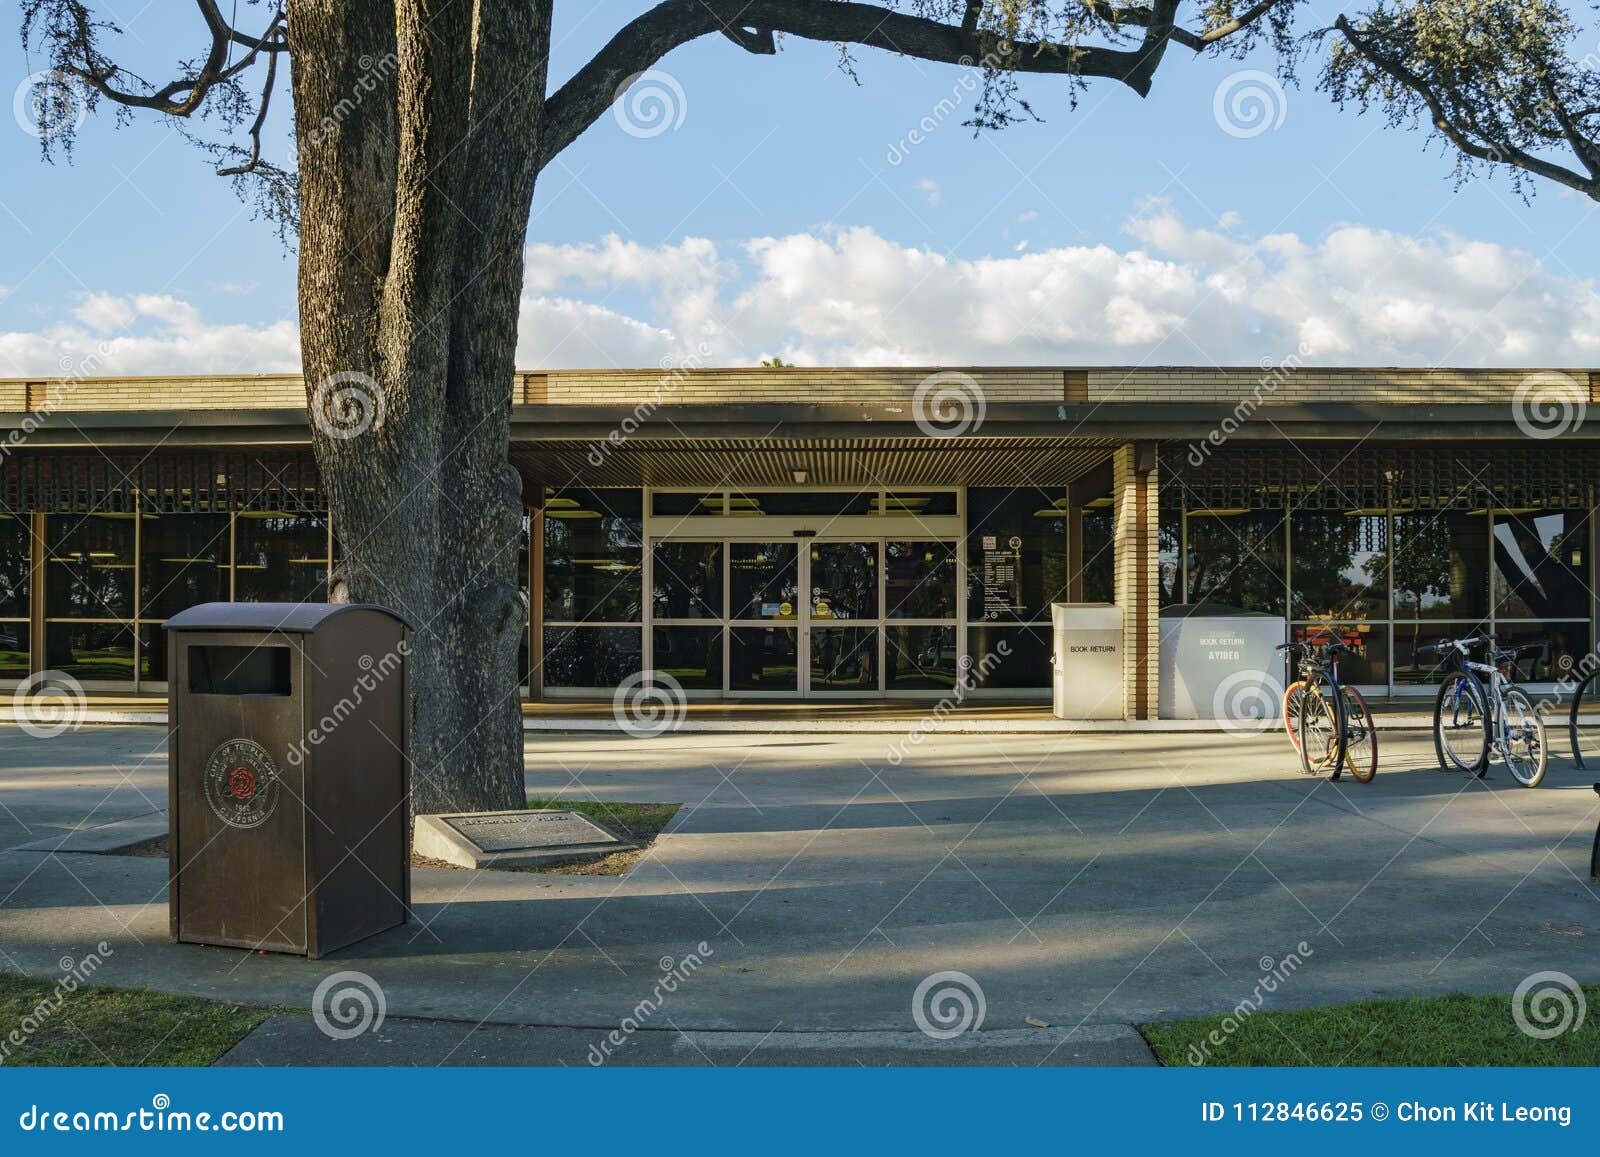 The Beautiful Temple City Park Stock Image - Image of united, sunny ...